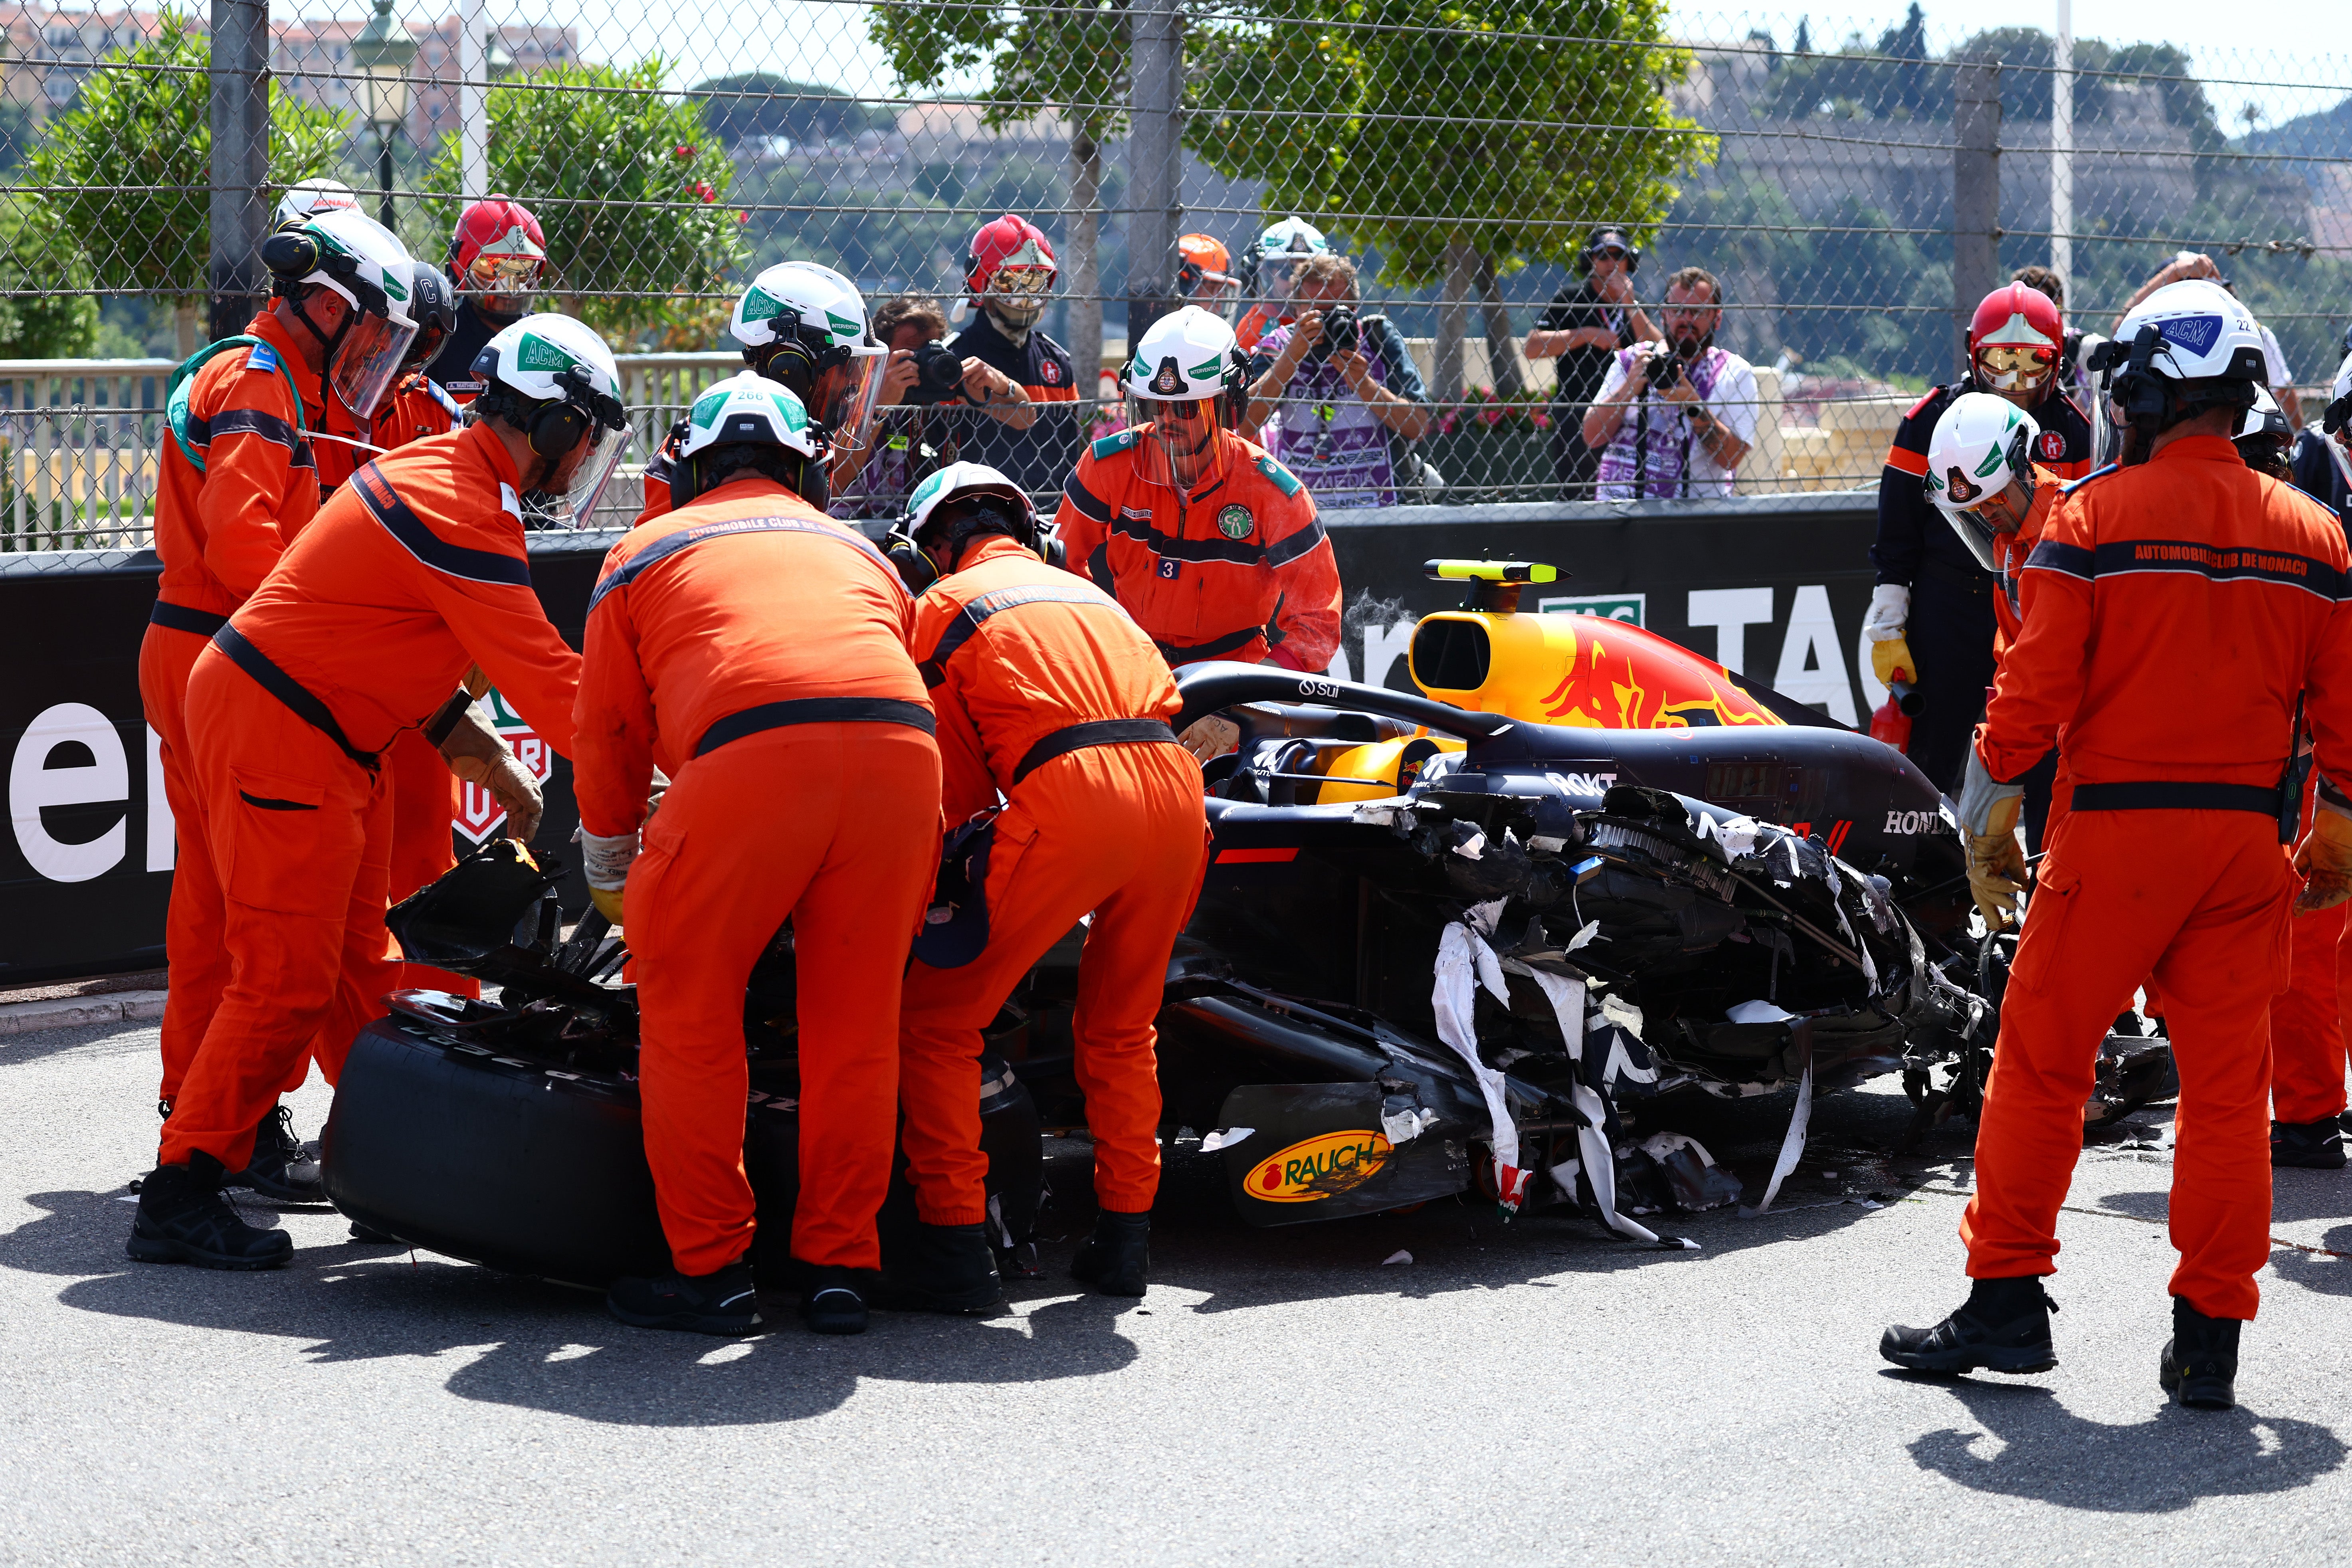 Sergio Perez’s Red Bull was left in pieces after a crash in Monaco